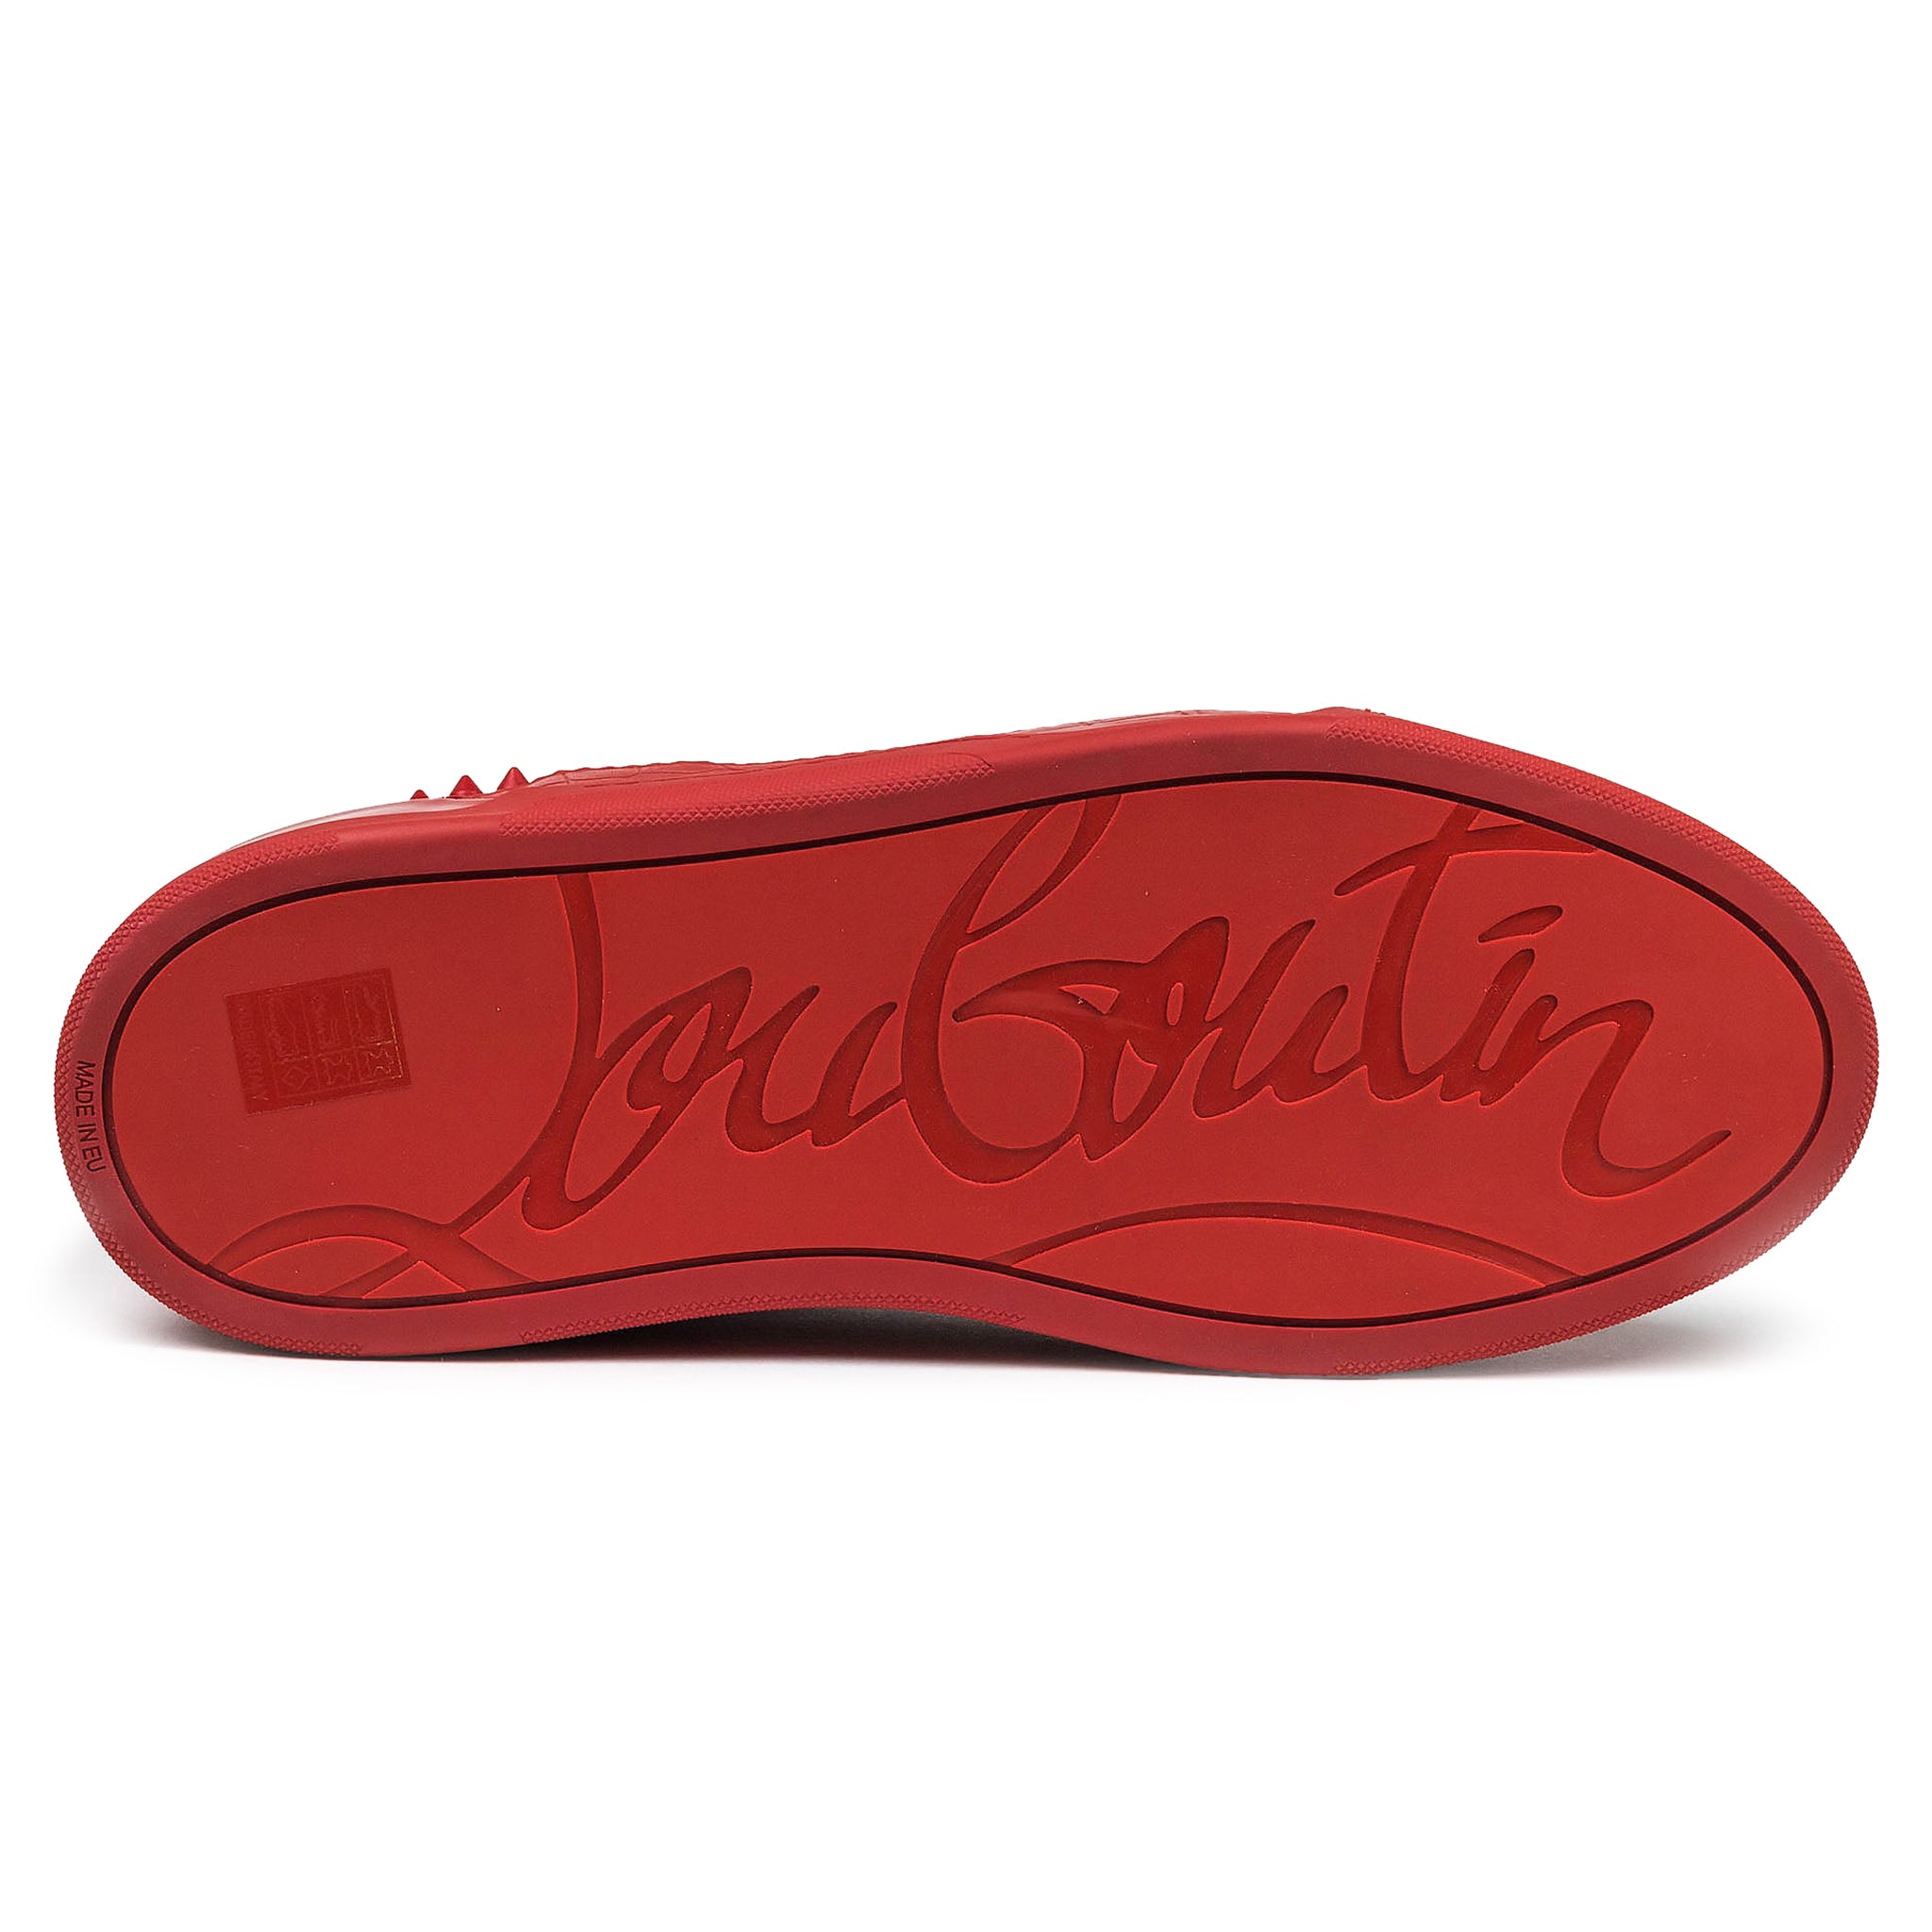 Christian Louboutin - Authenticated Sandal - Leather Red Plain for Men, Very Good Condition